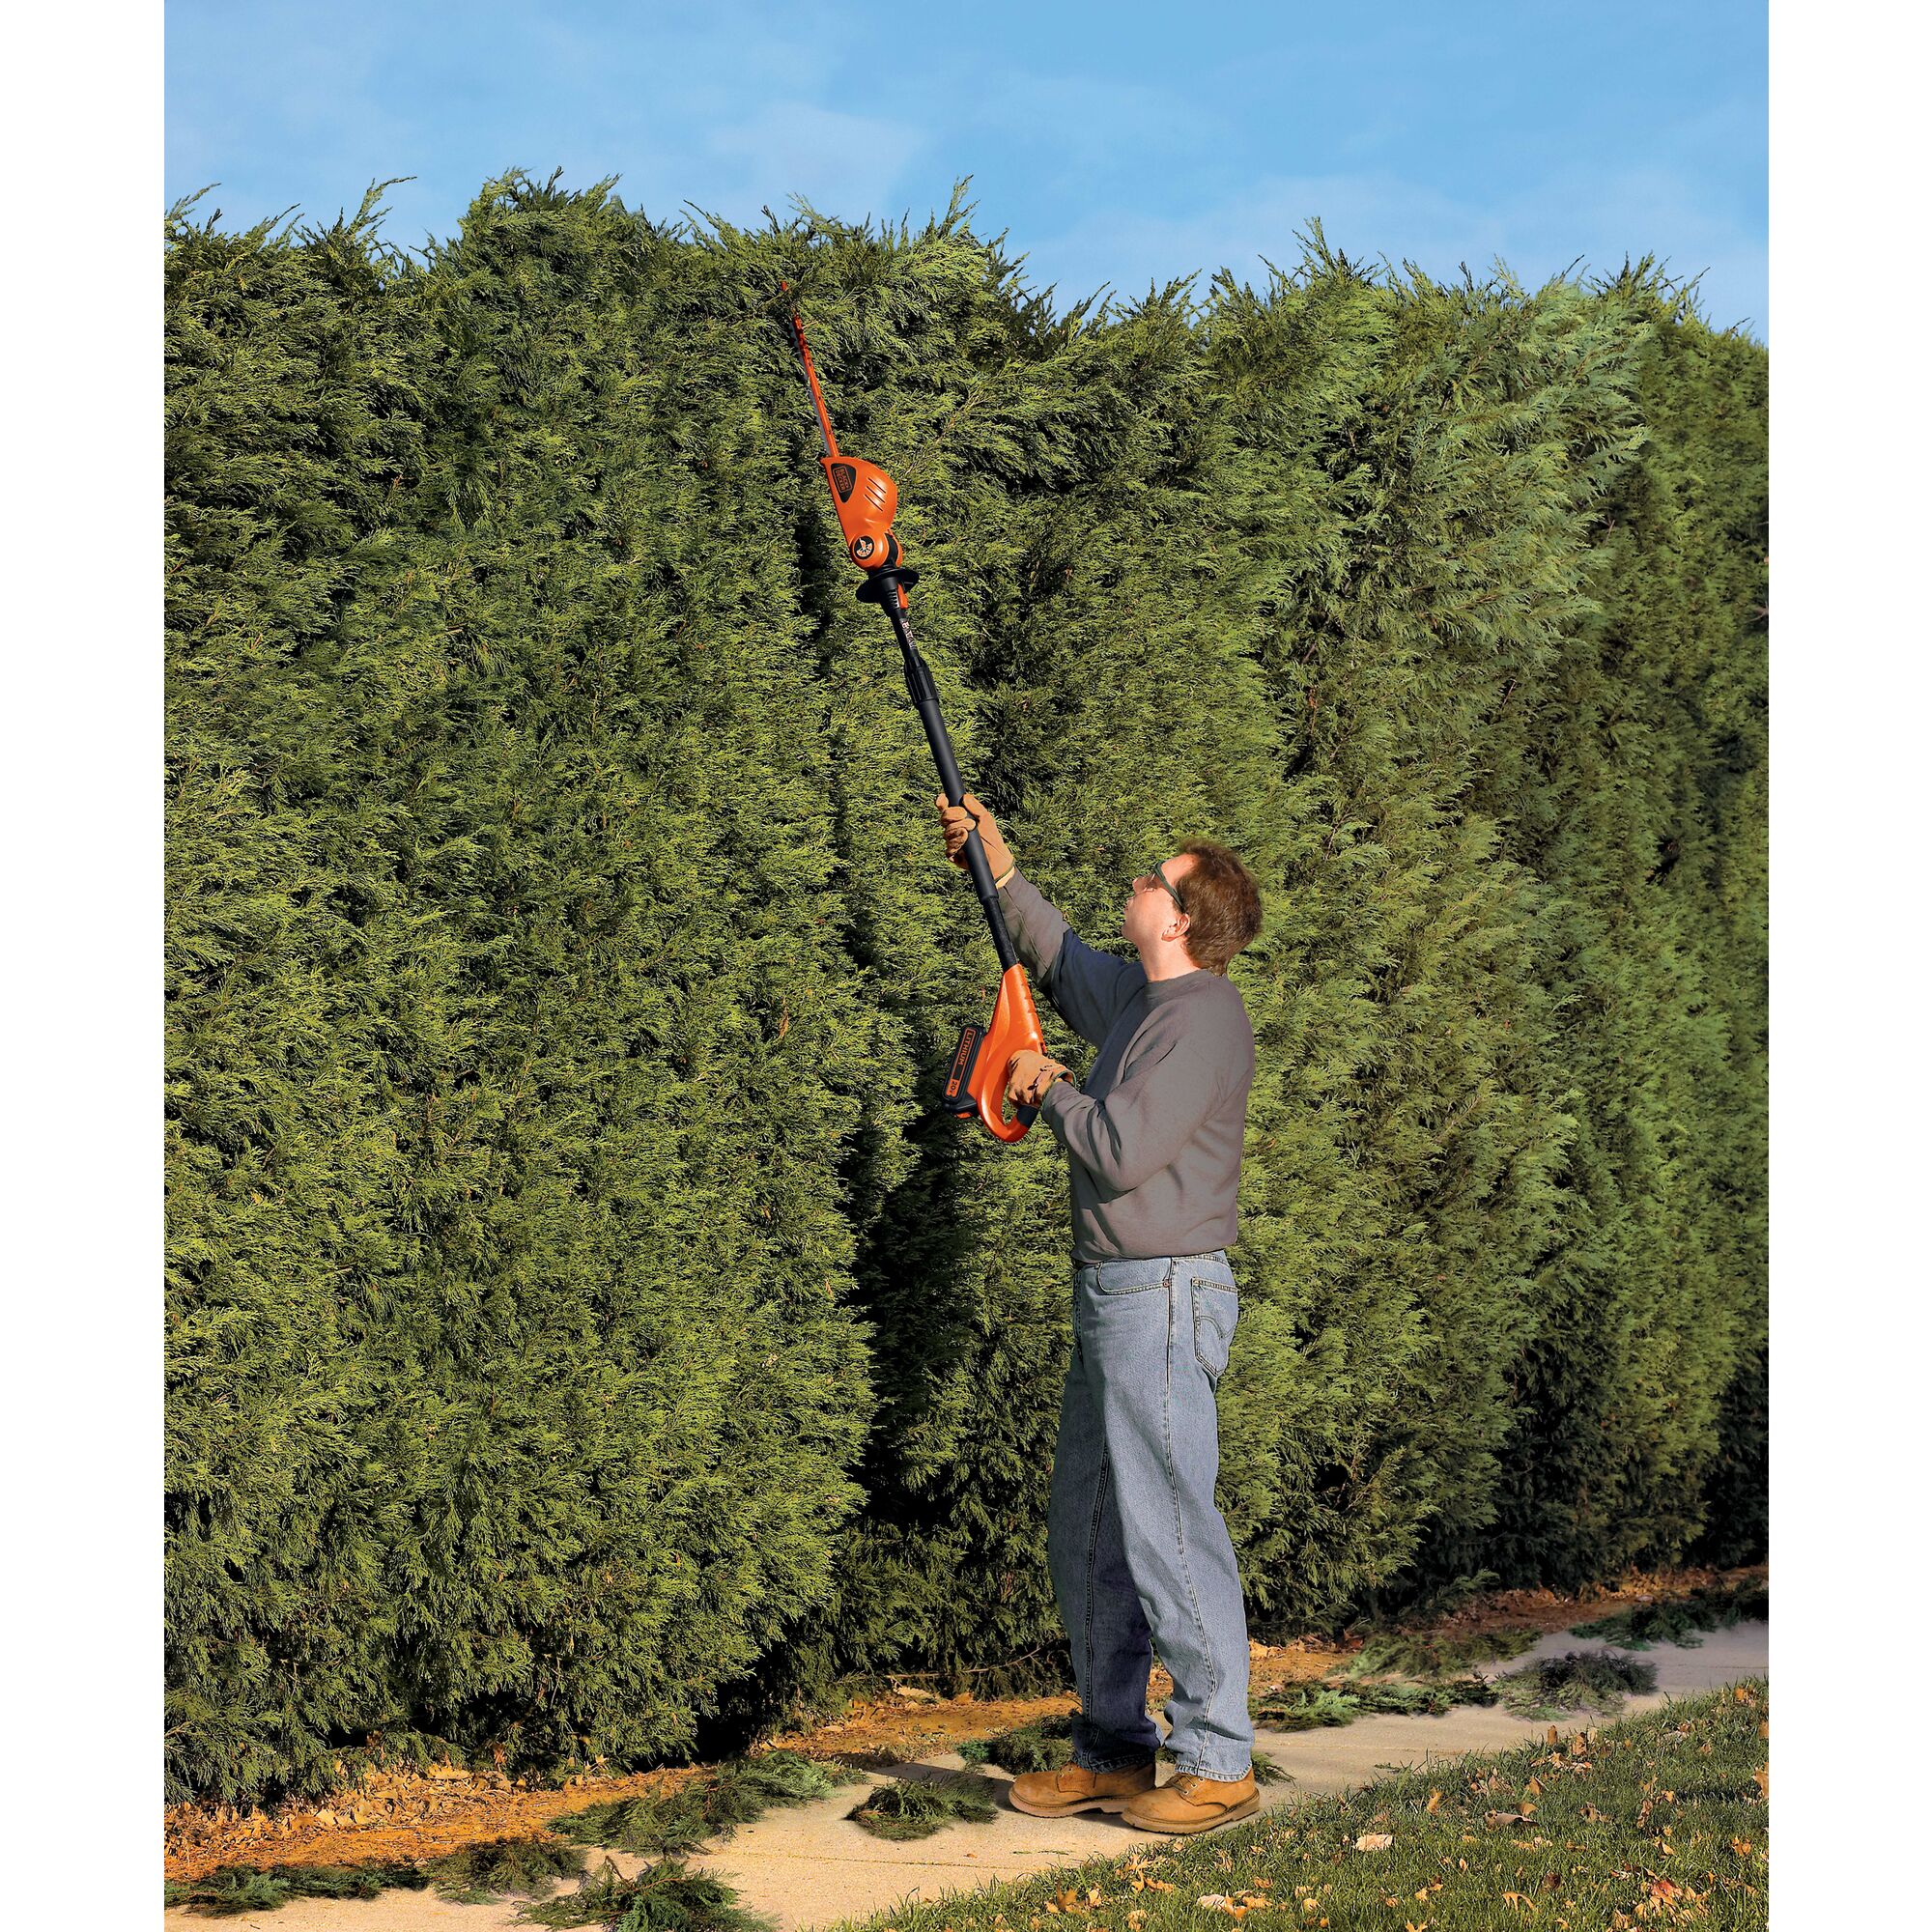 MAX Lithium Pole Hedge Trimmer being used by person to trim long heighted shrubs outdoors.